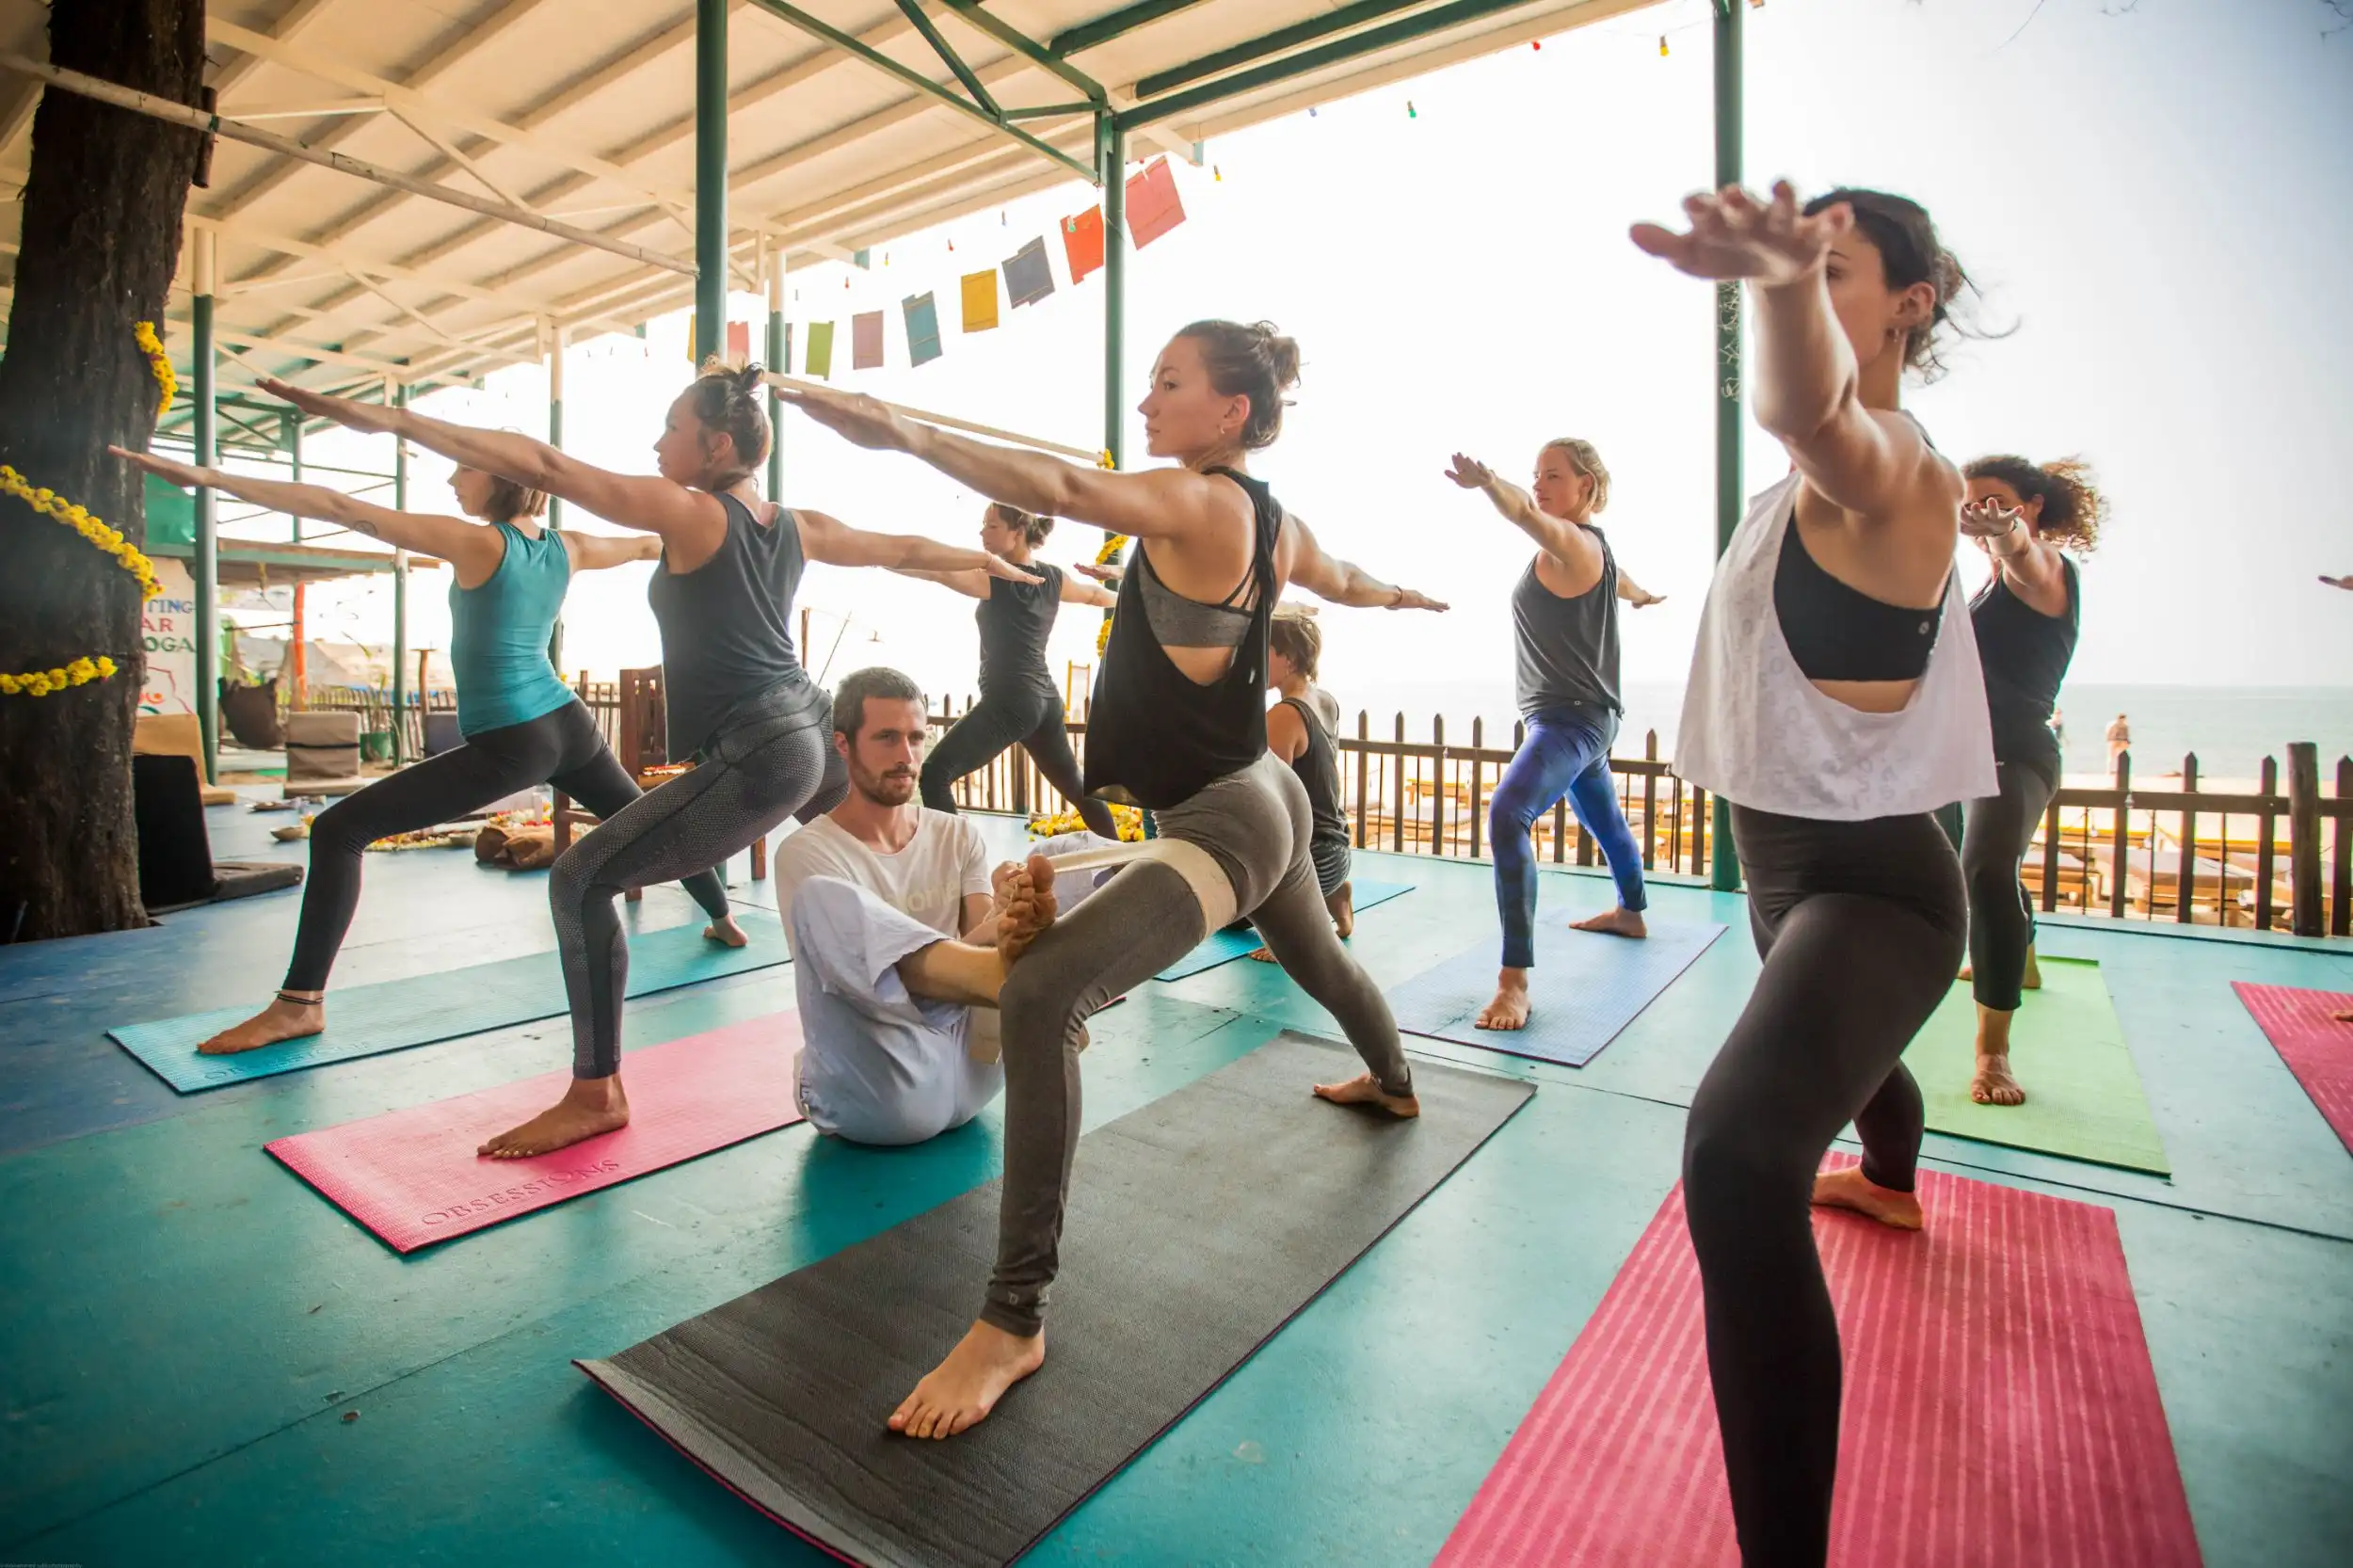 Yoga enthusiasts in India participating in 100 hr yoga training outdoors